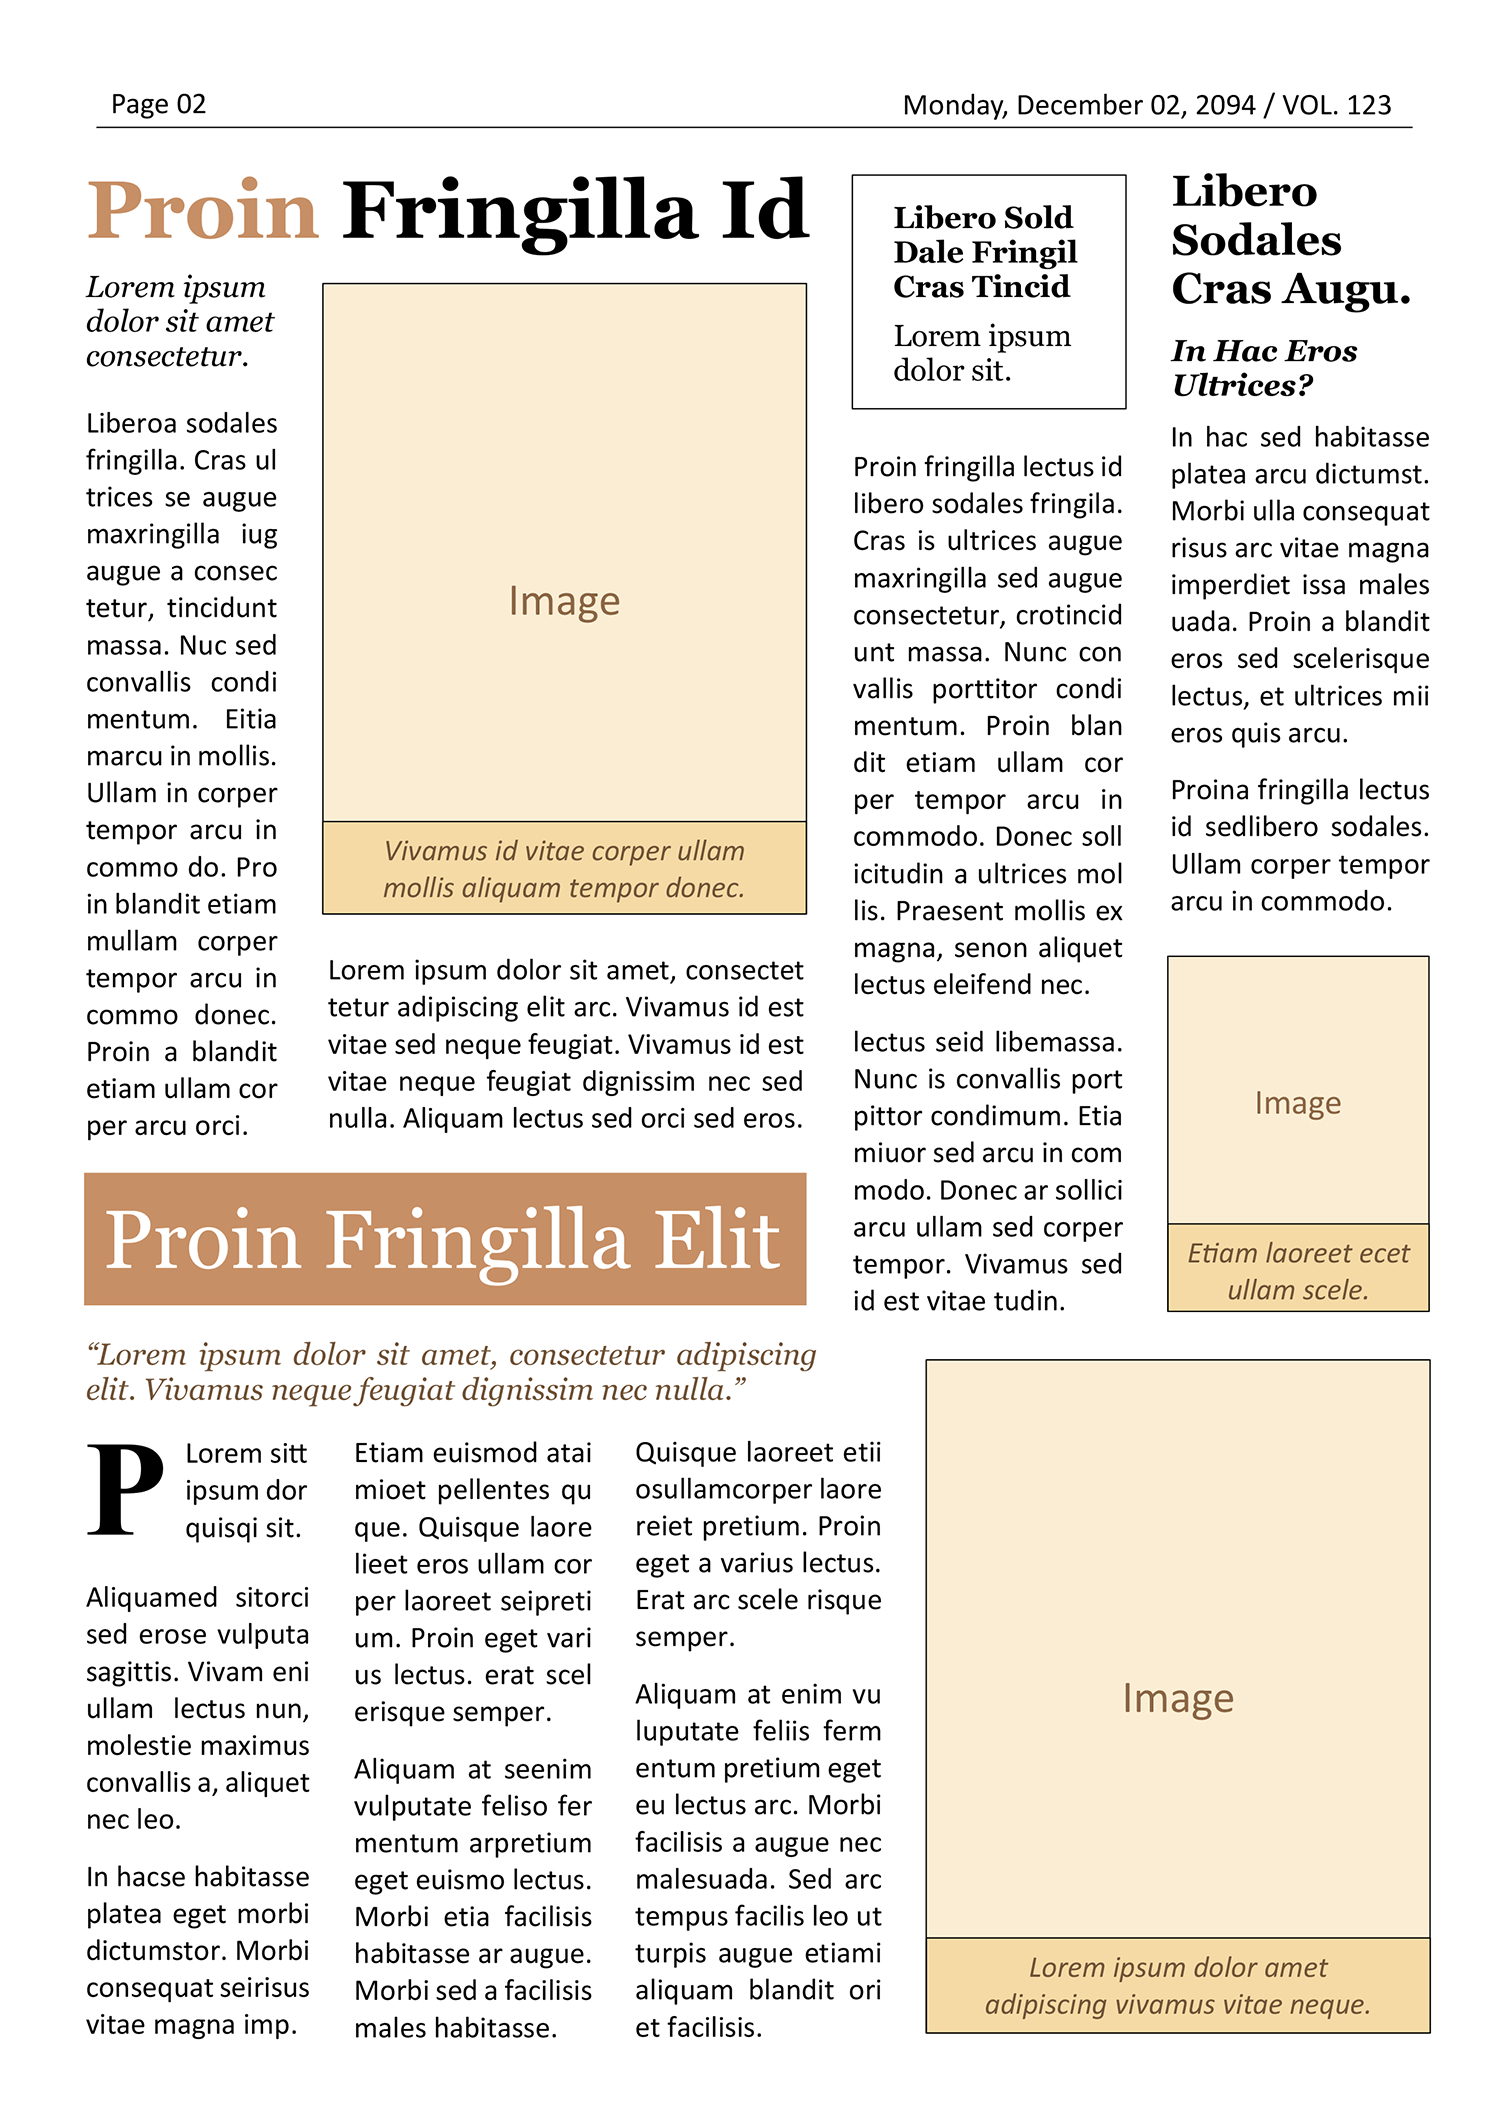 Old Style Front Page Newspaper Template - Page 02